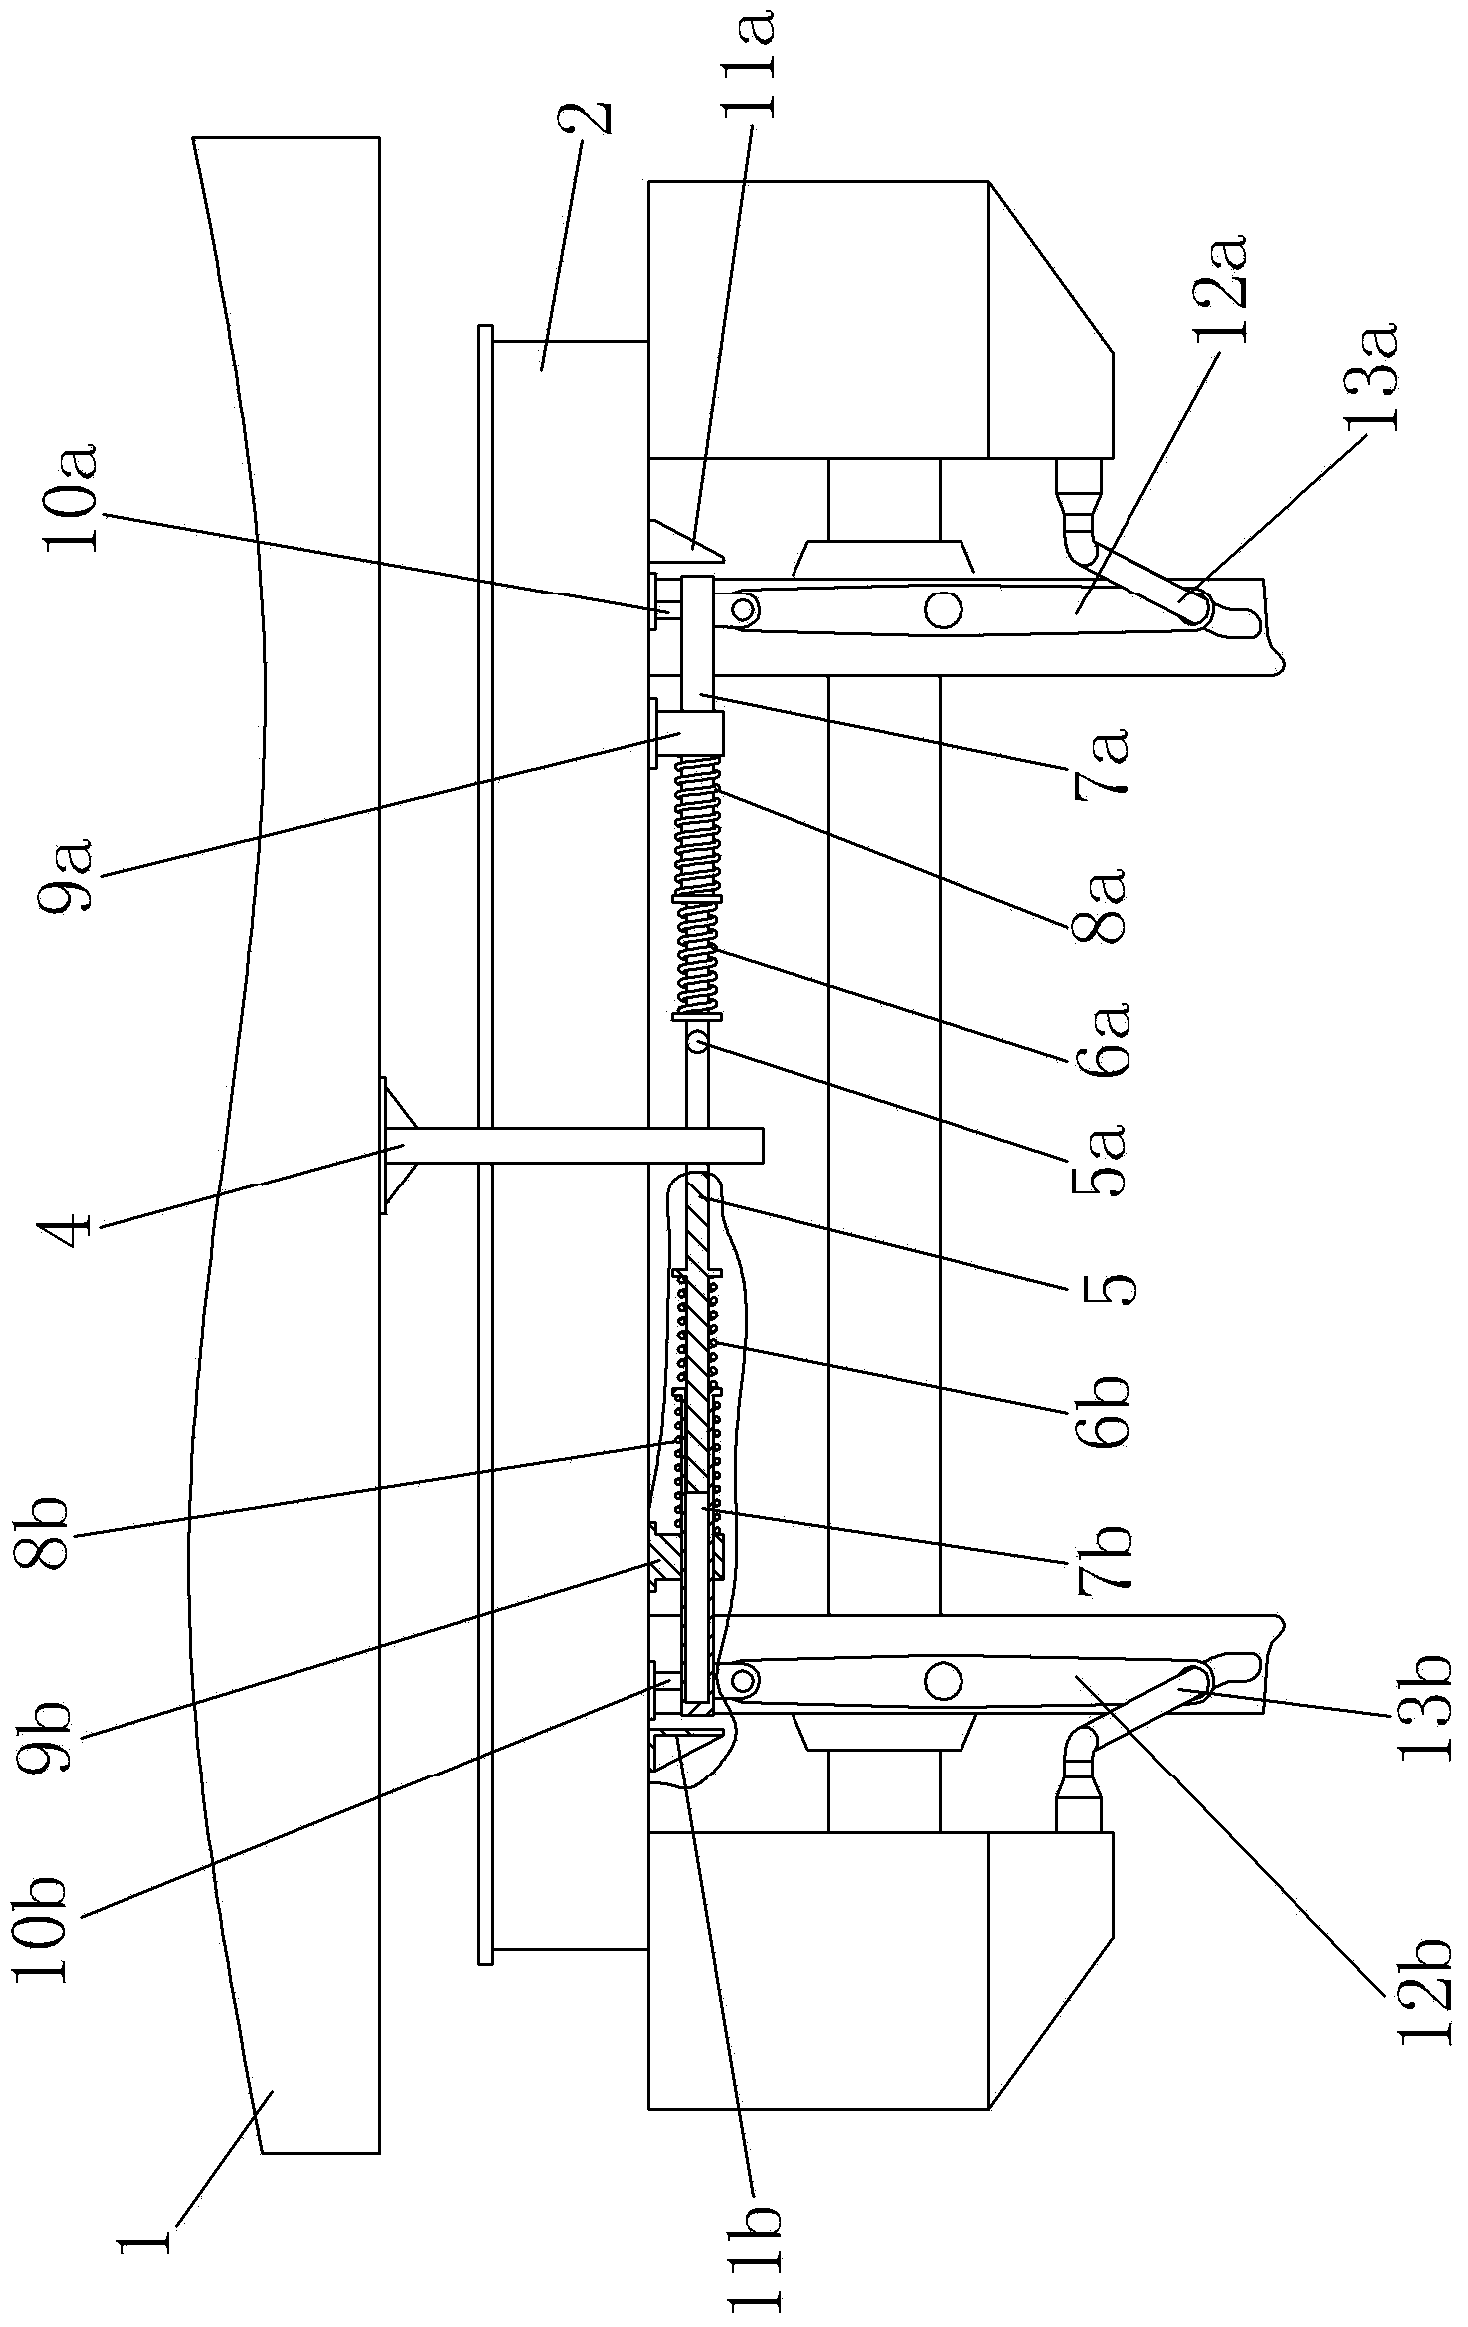 Through-curve anti-deflection mechanism for sanding device at end part of locomotive car body